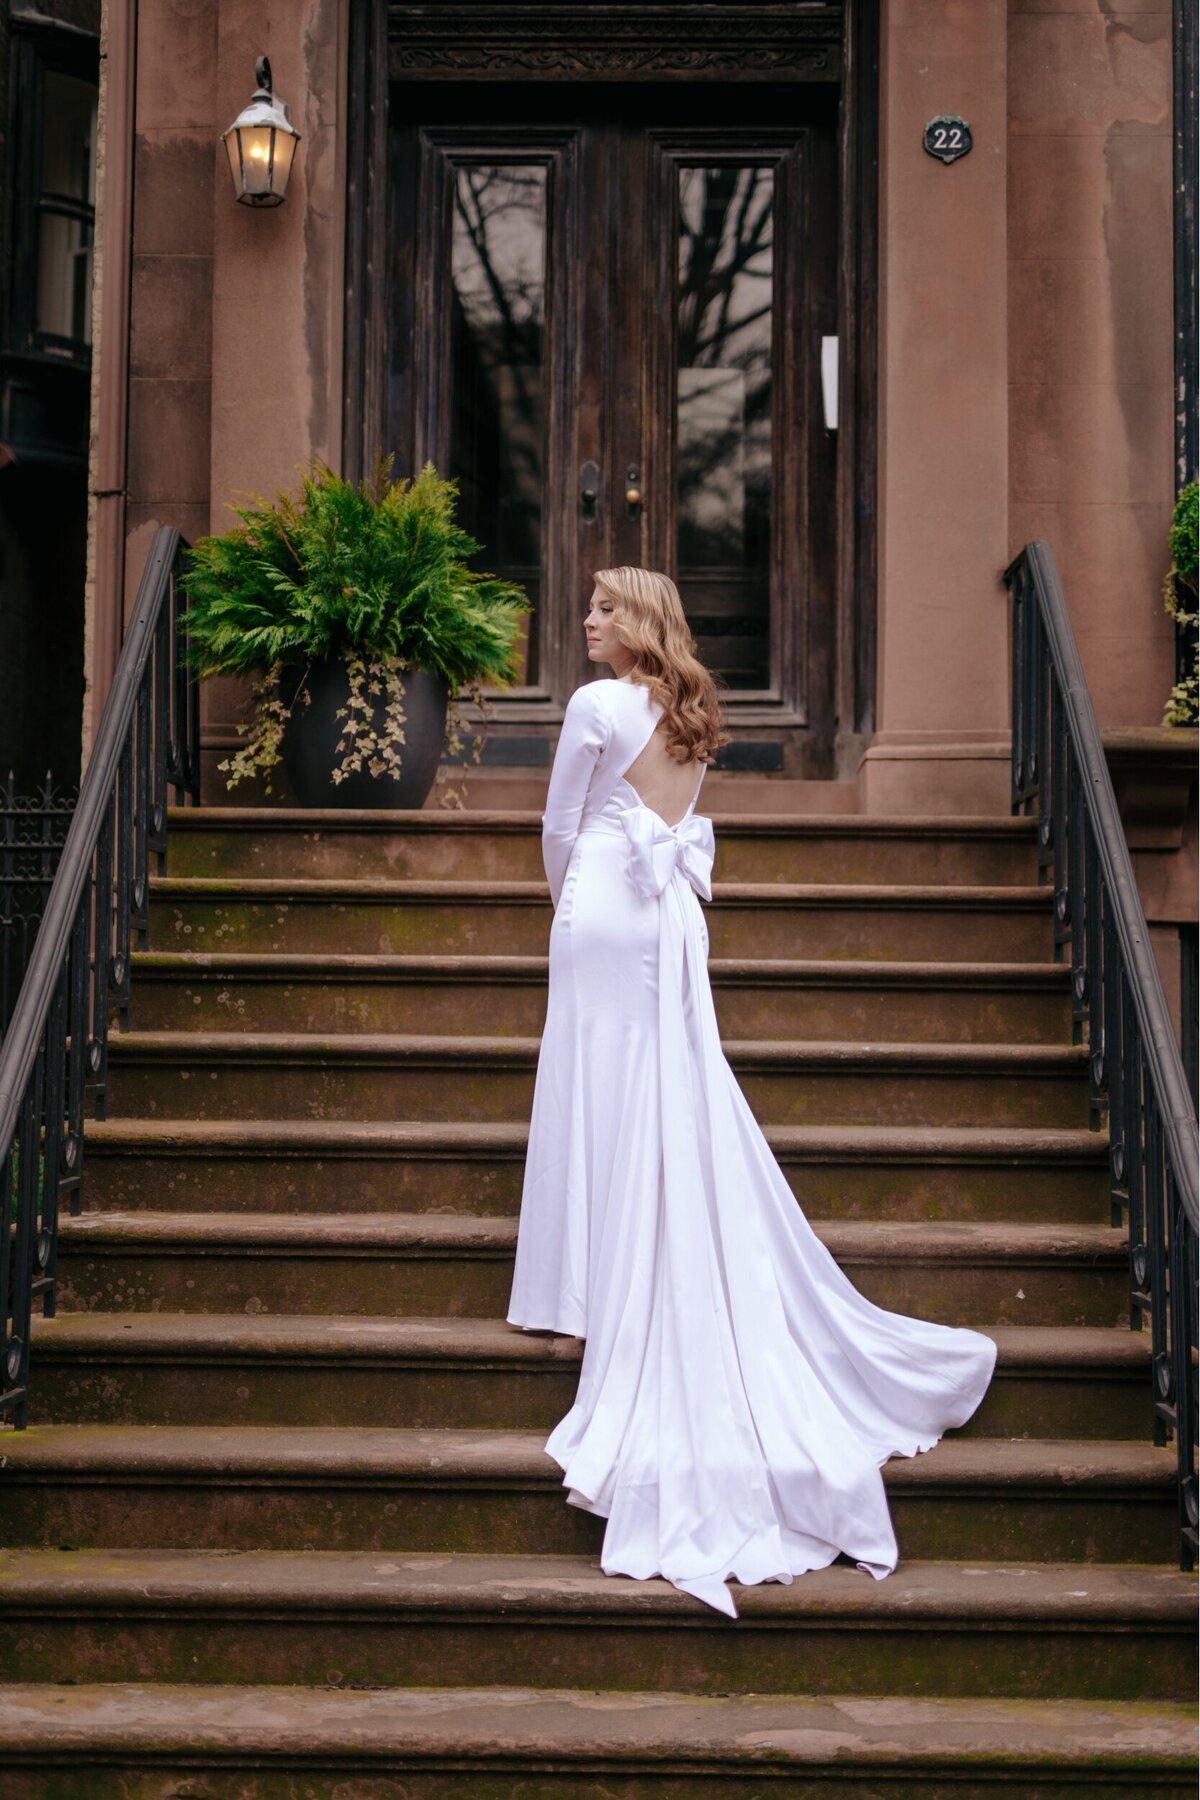 Bride in wedding dress on the stairs with the back view of her gown.